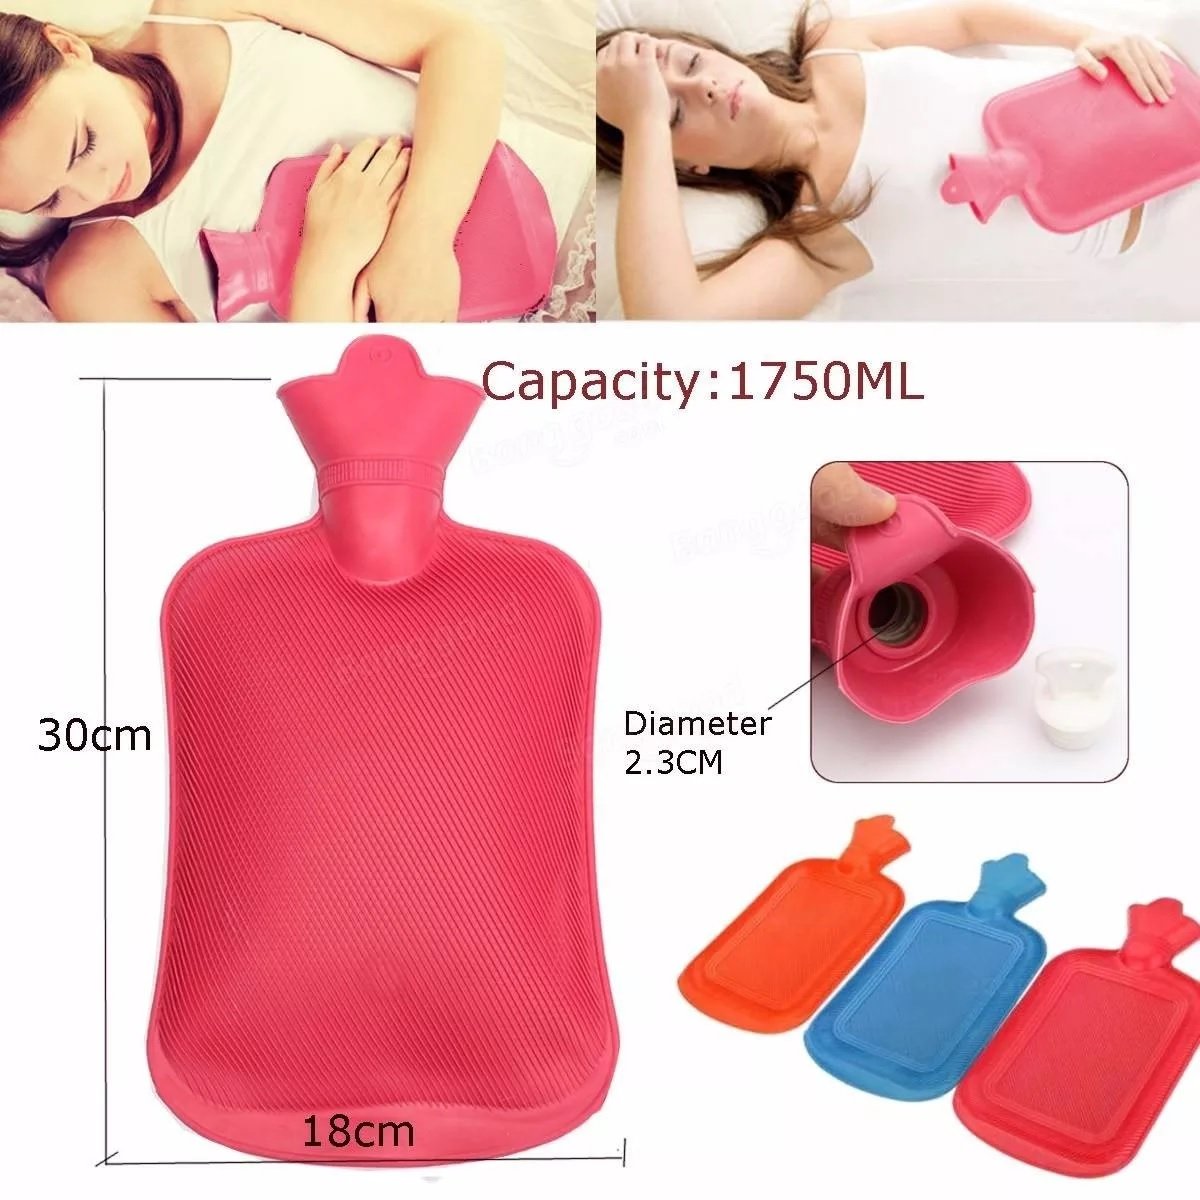 POCT Rubber Non-Electrical Hot Water Bag